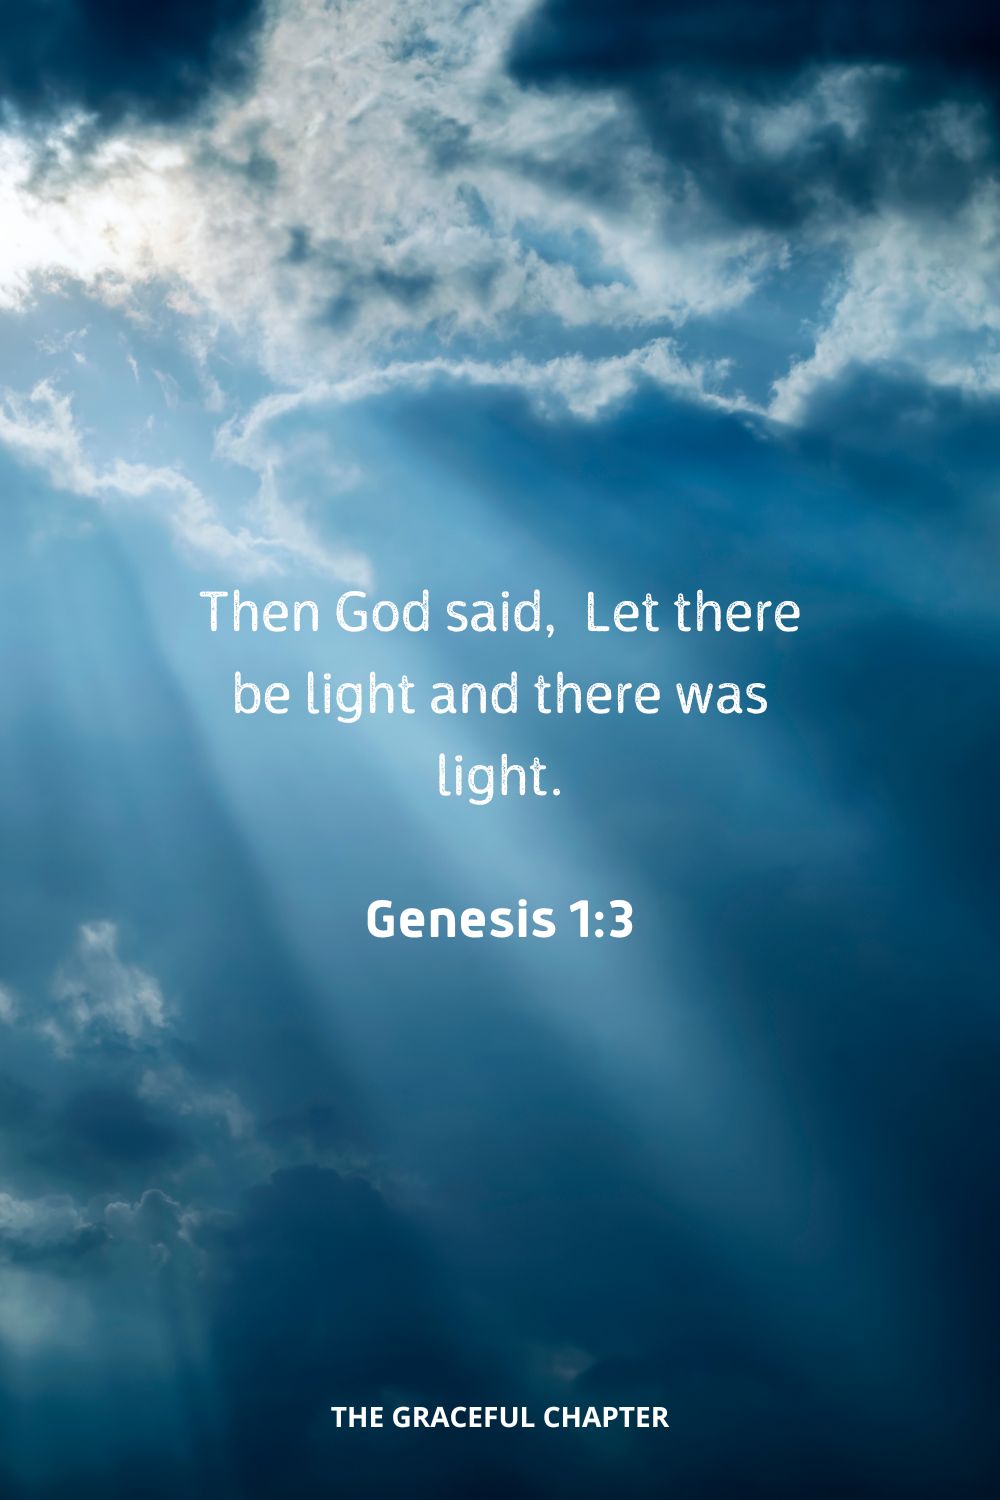 Then God said, “Let there be light”; and there was light.